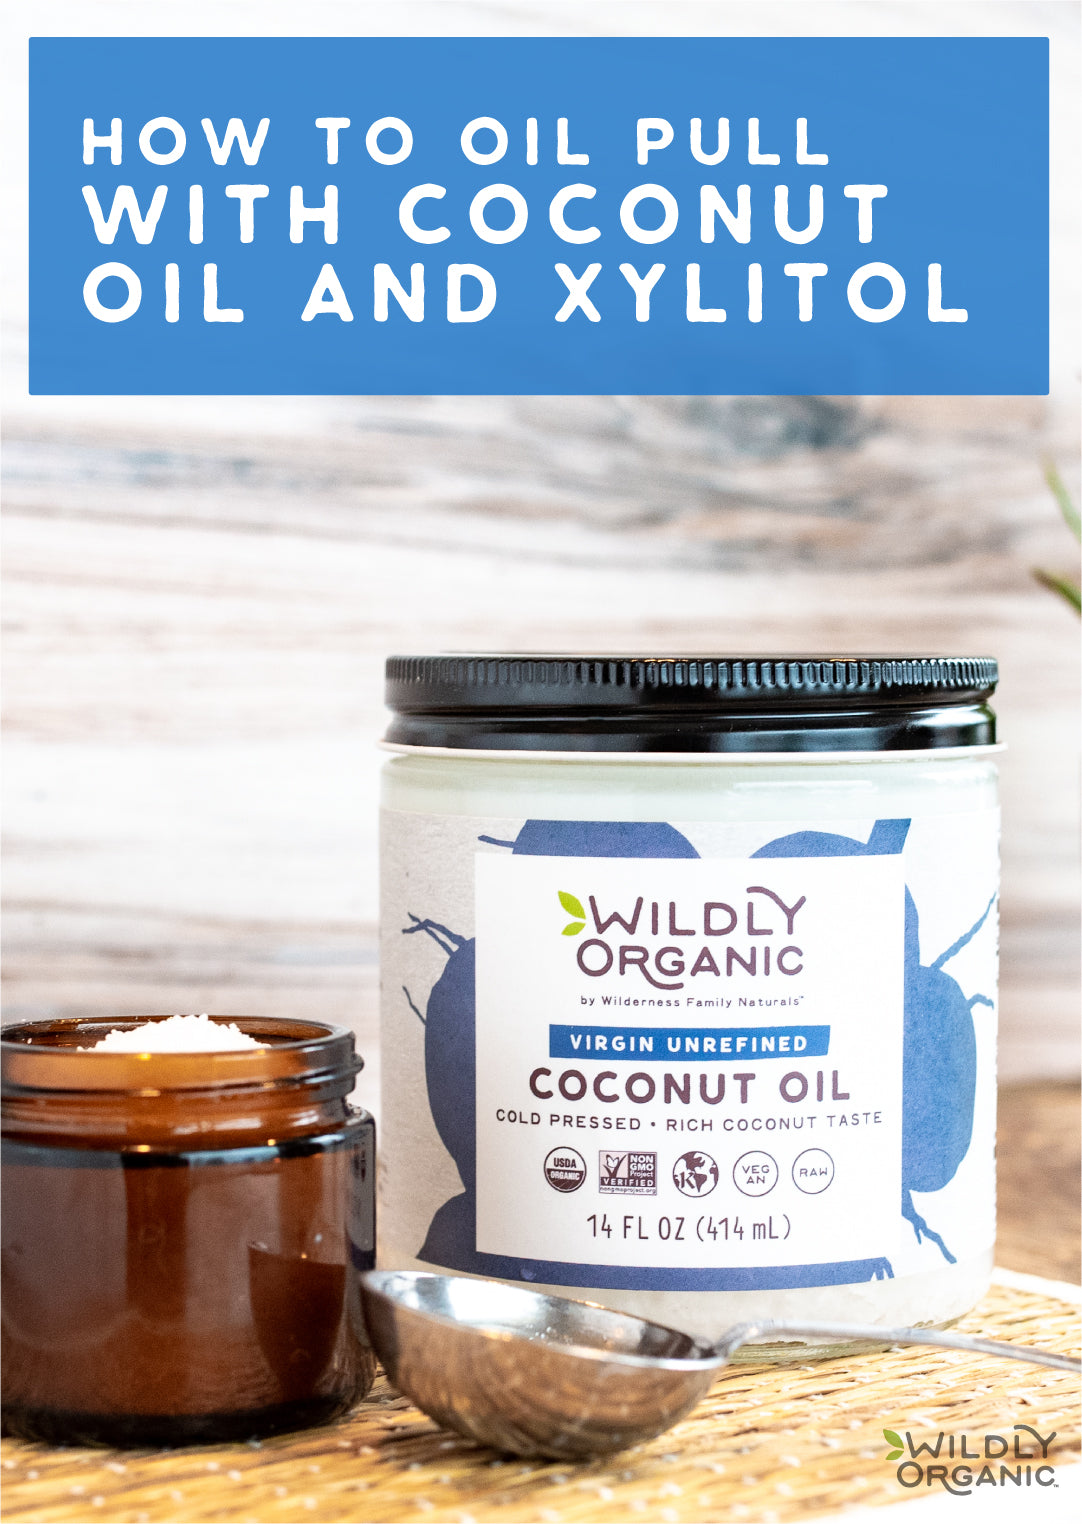 Jar of Wildly Organic Cold Pressed Coconut oil with metal scoop on wooden counter top